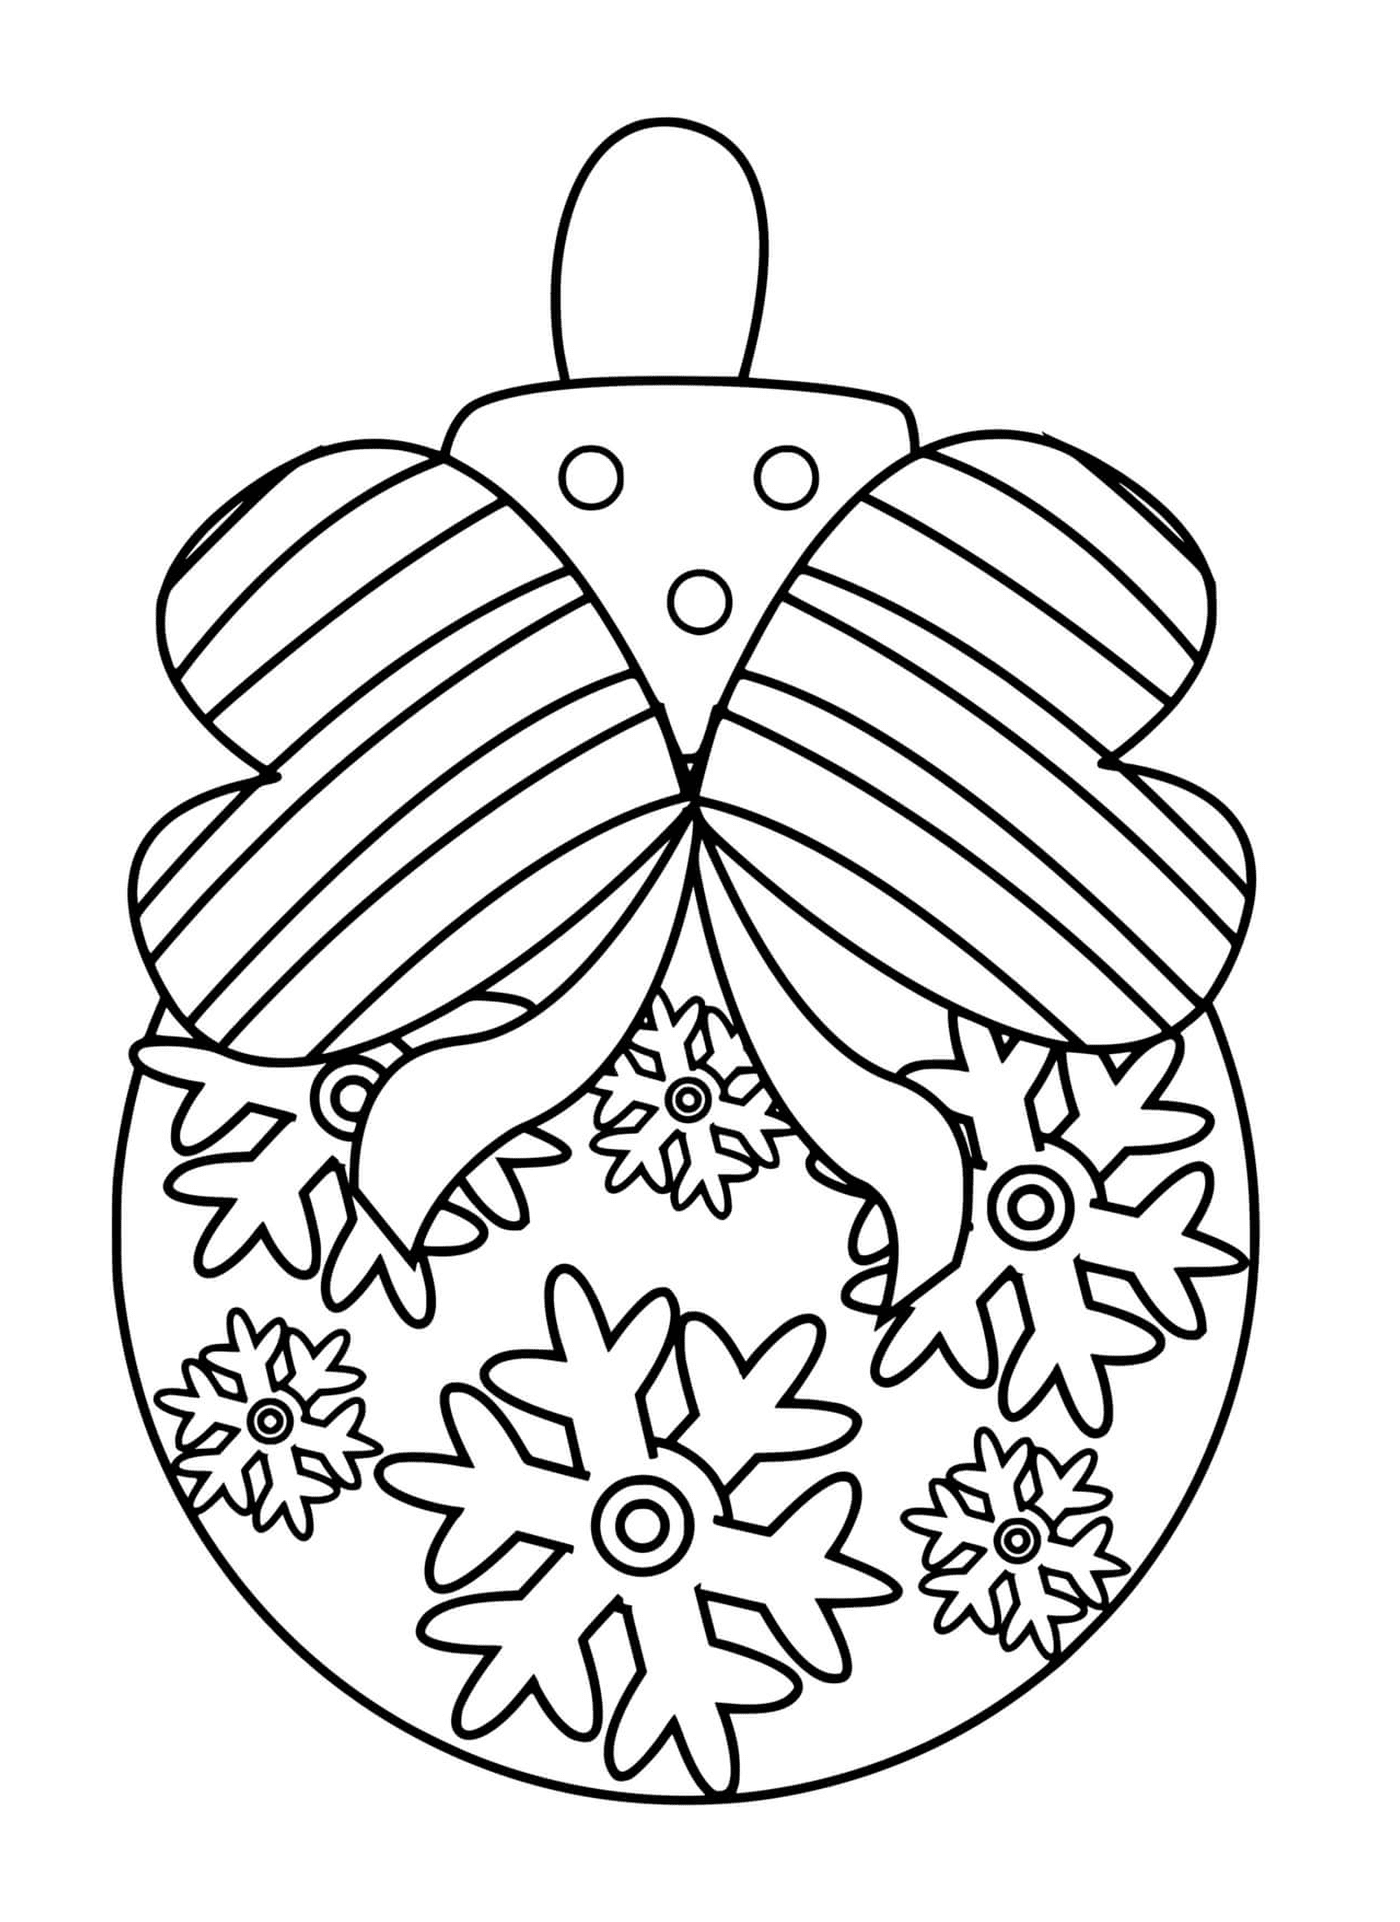  A Christmas tree ball with snowflakes and a ribbon 